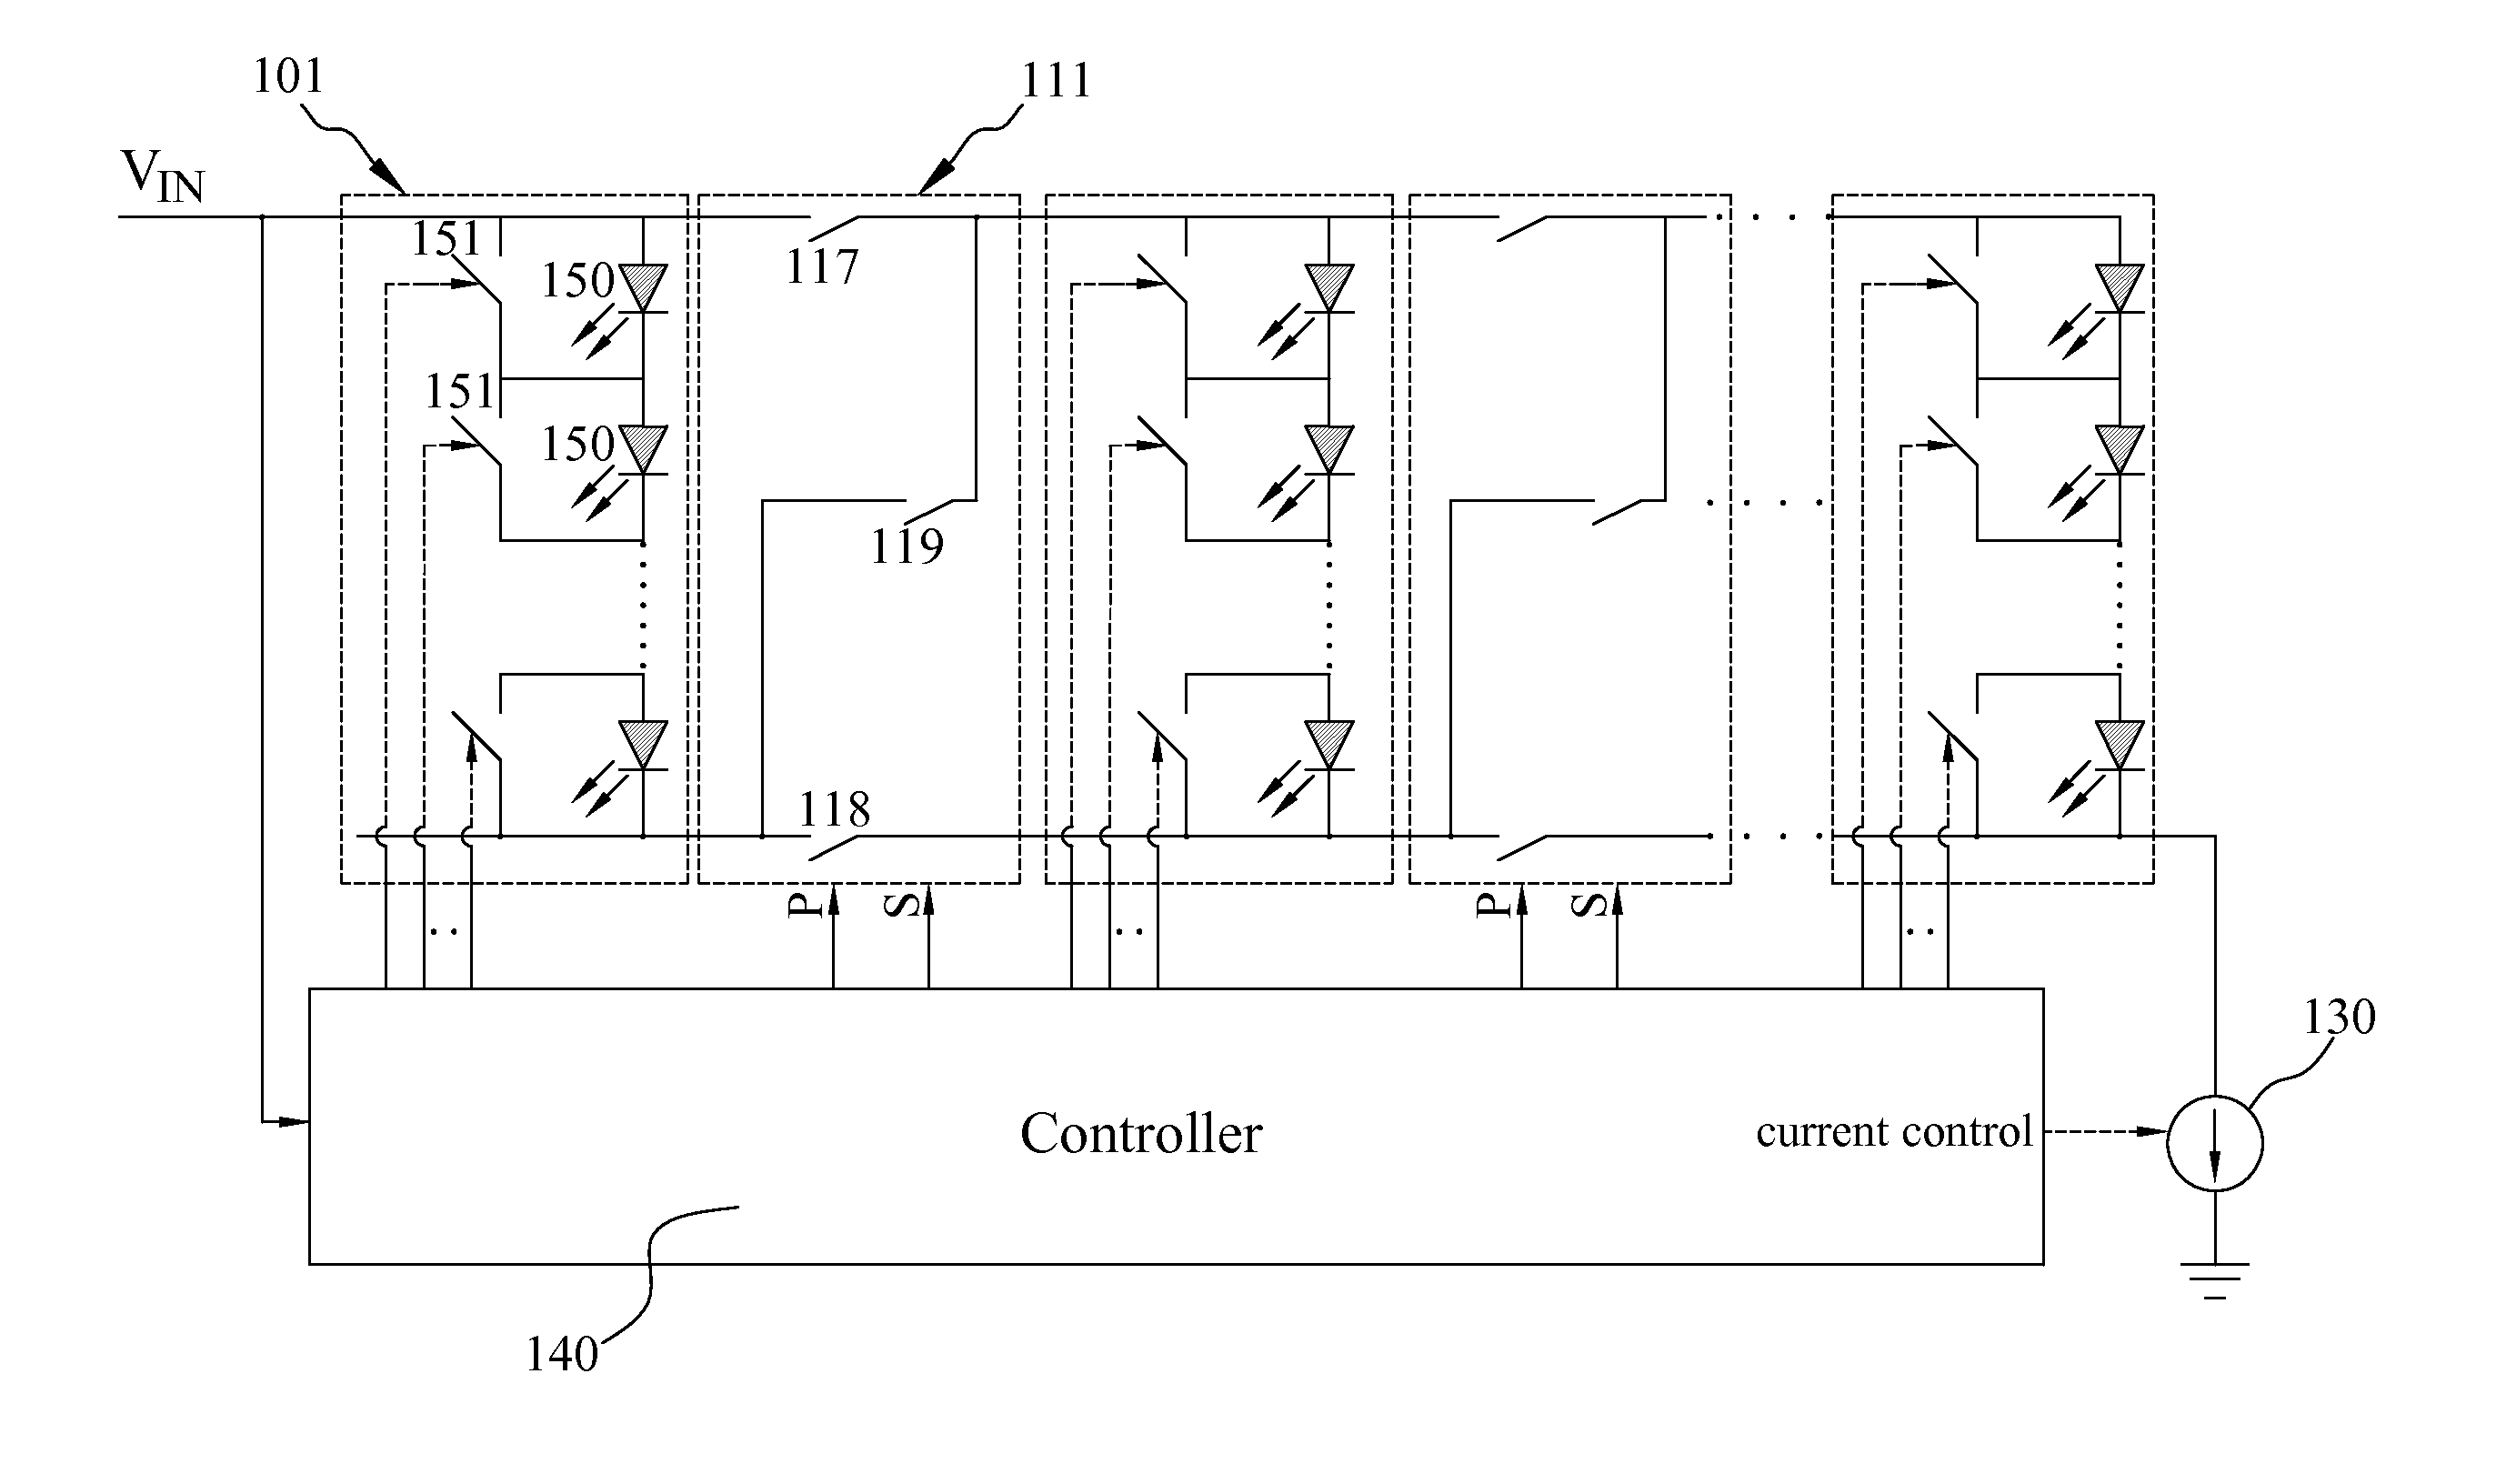 Apparatus having universal structure for driving a plurality of LED strings